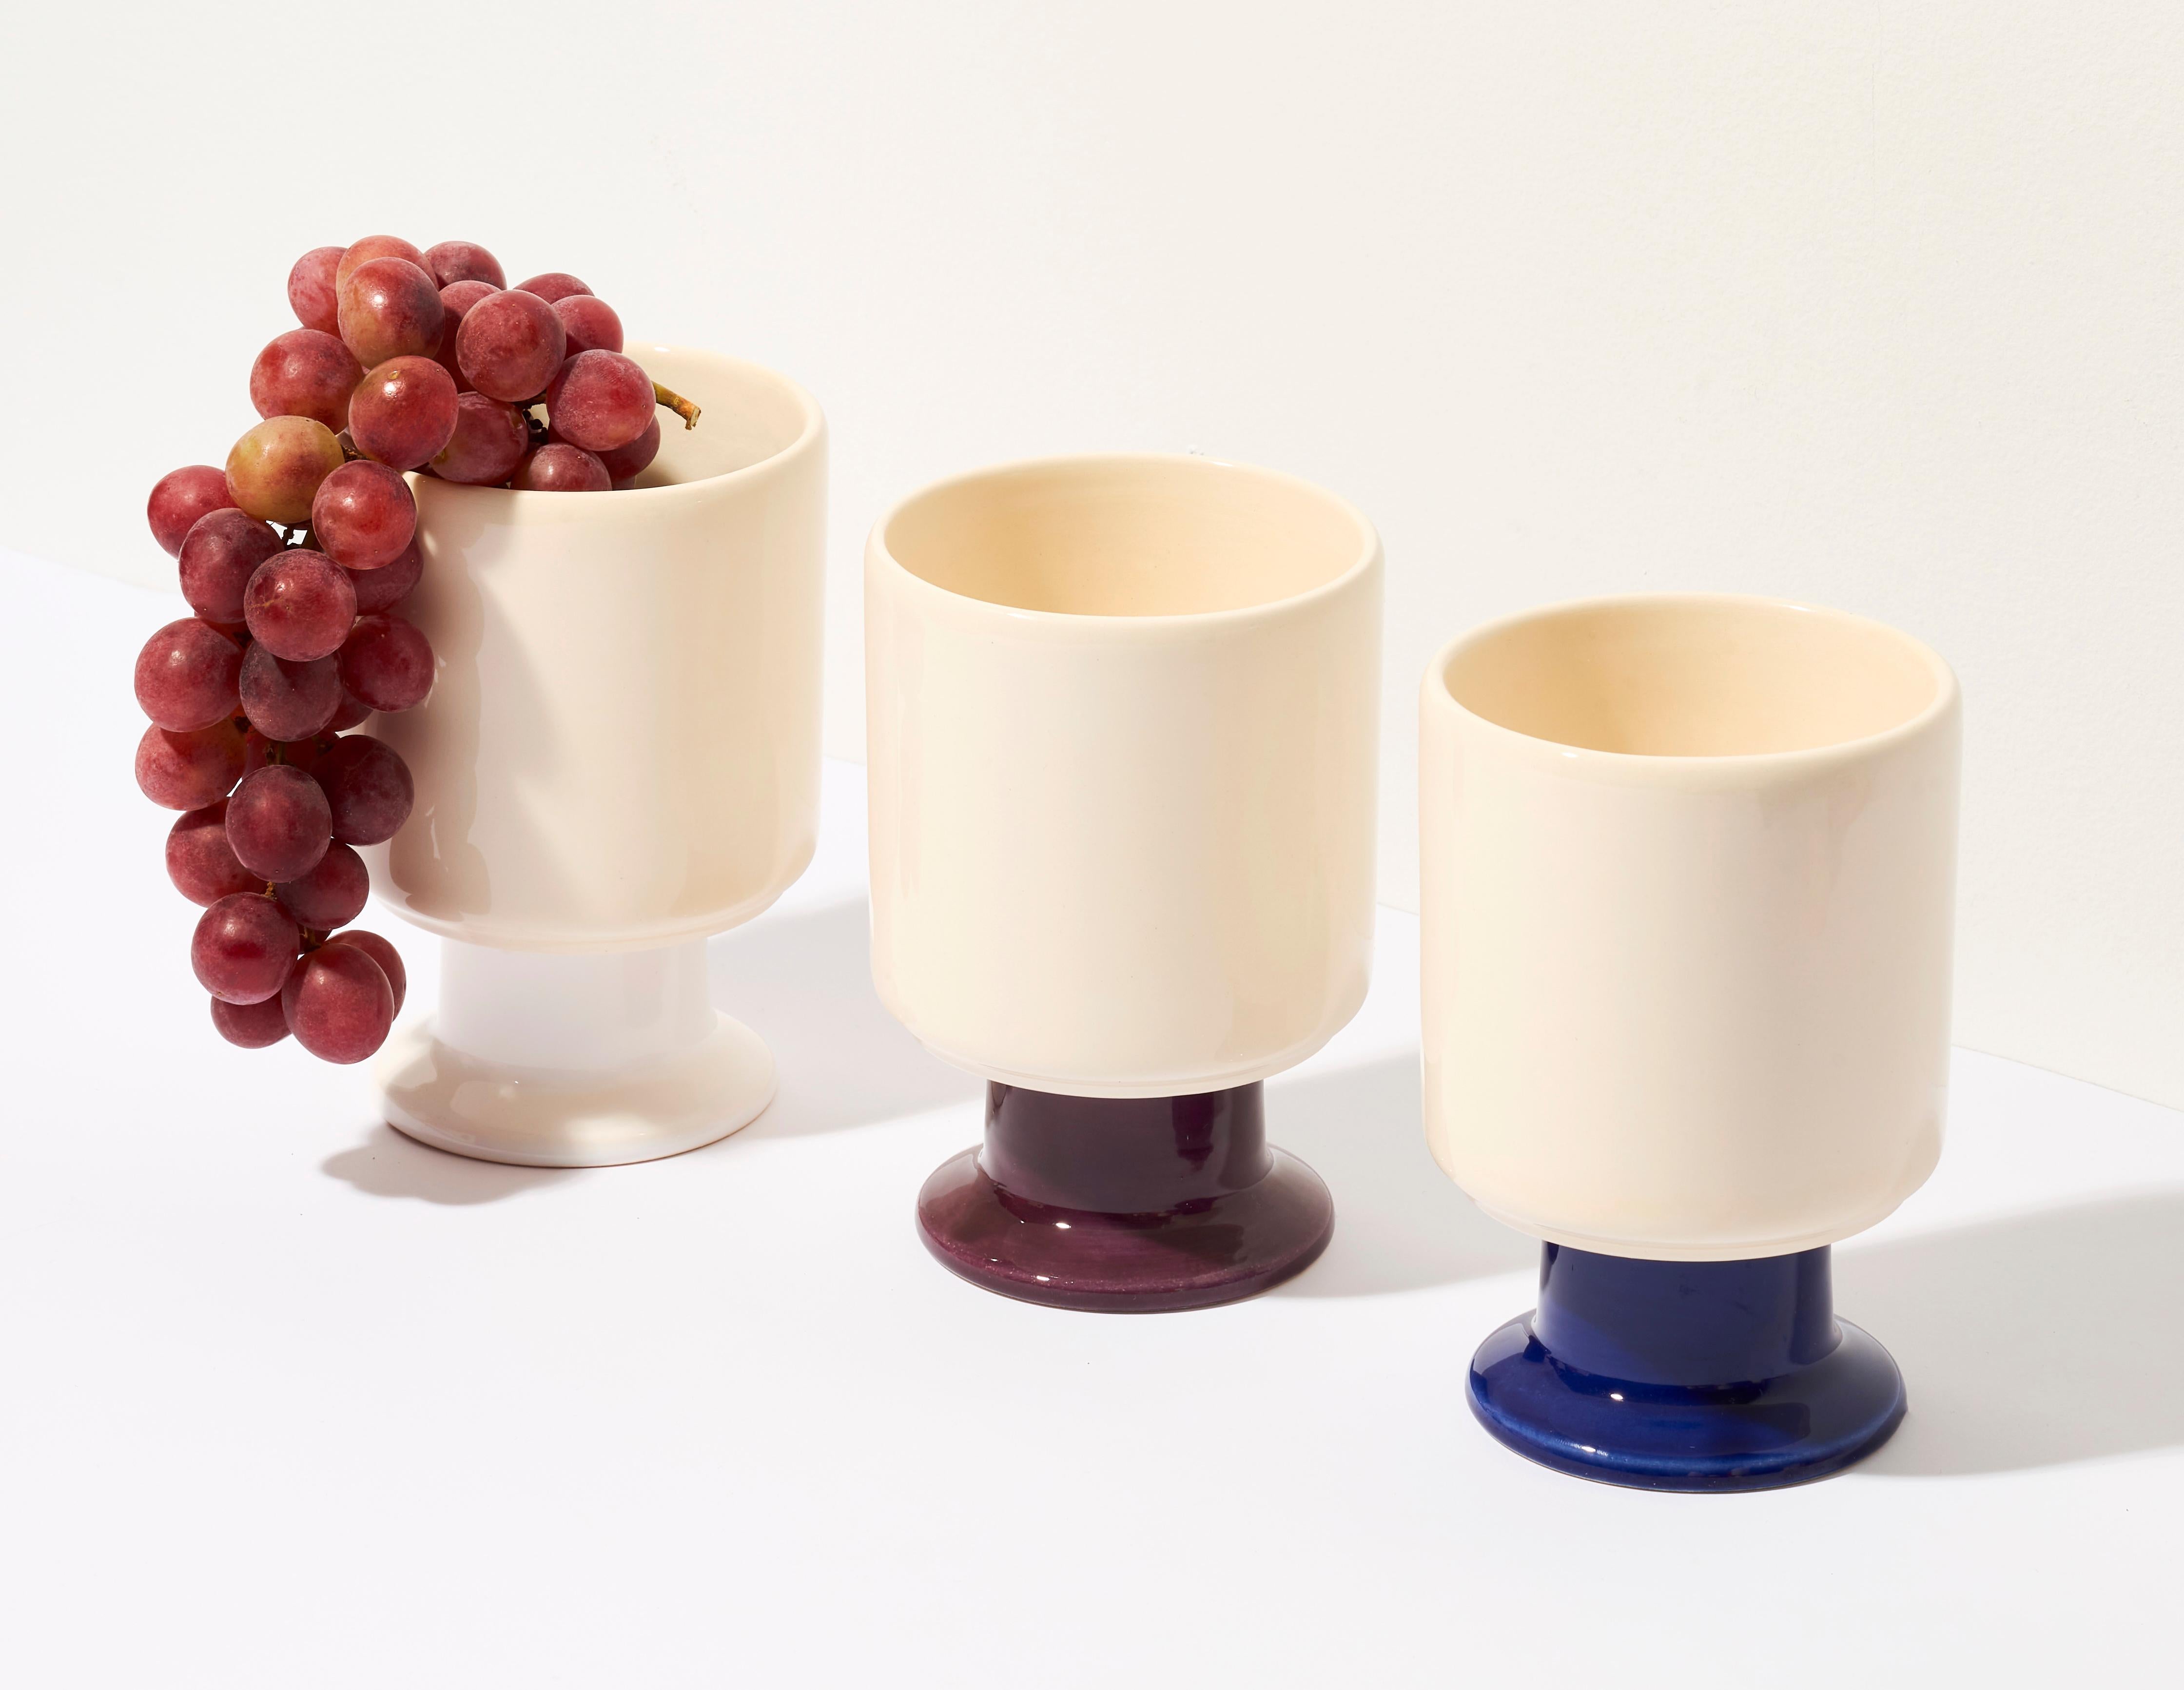 WIT mug / set of 3.

The WIT cup is a multifunctional vessel with a playful stem. It can become your favorite coffee cup, a dessert bowl, a container for pens, or other favorite accessories. WIT chalices can be stacked to create stable towers,